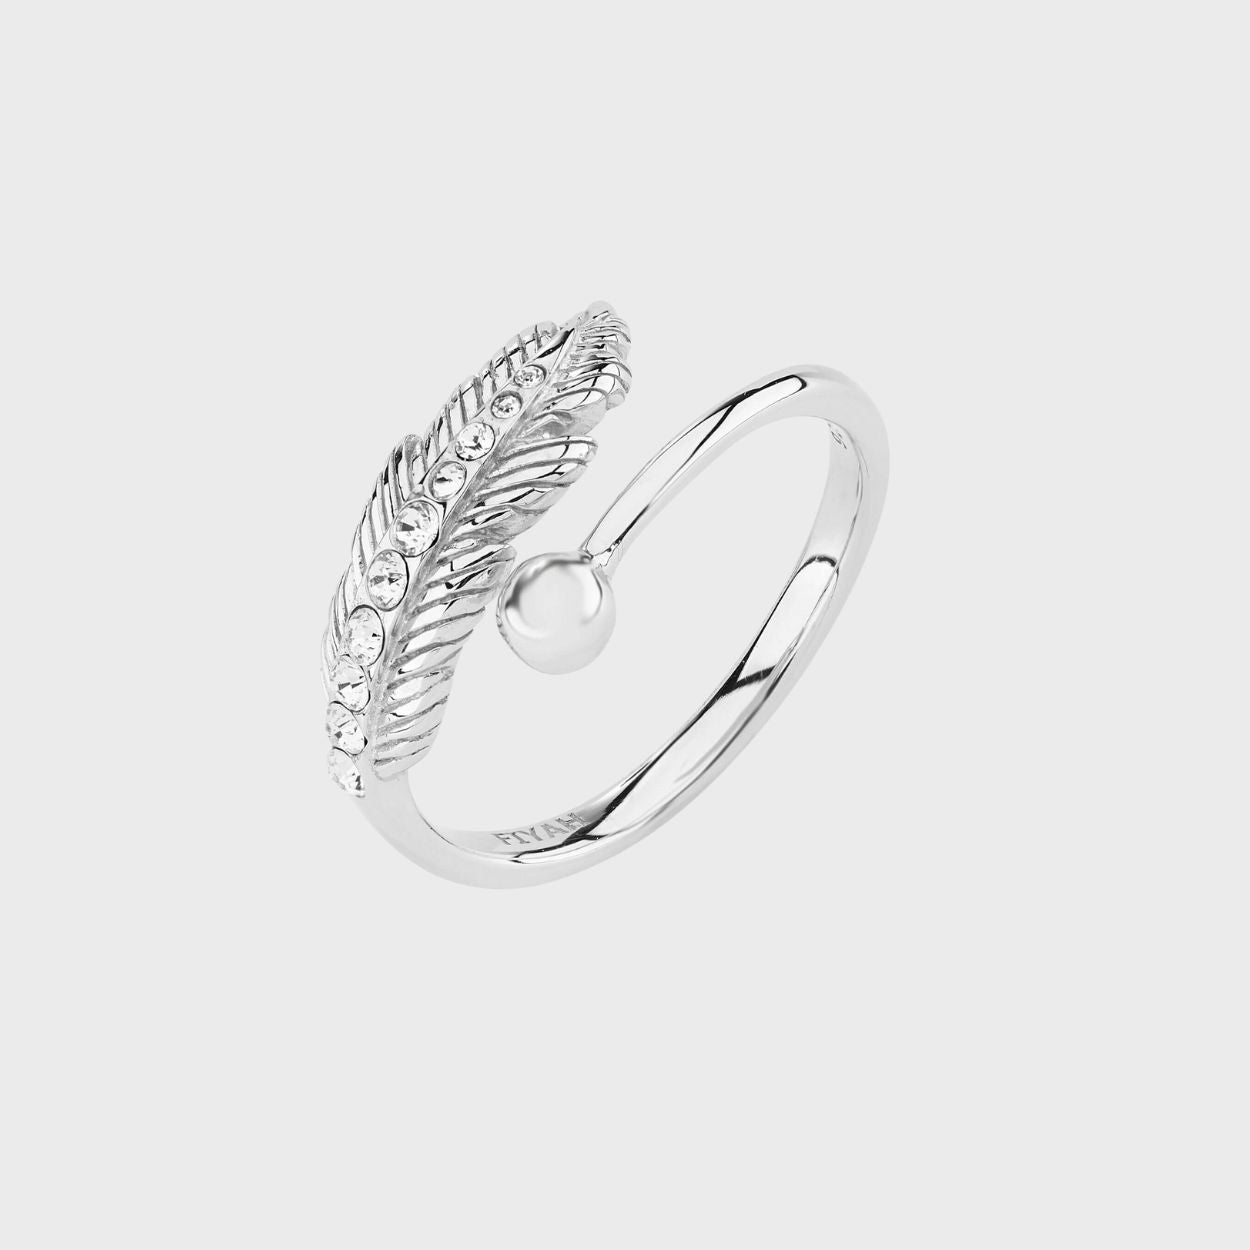 Adjustable Silver and Crystal Angelic Ring